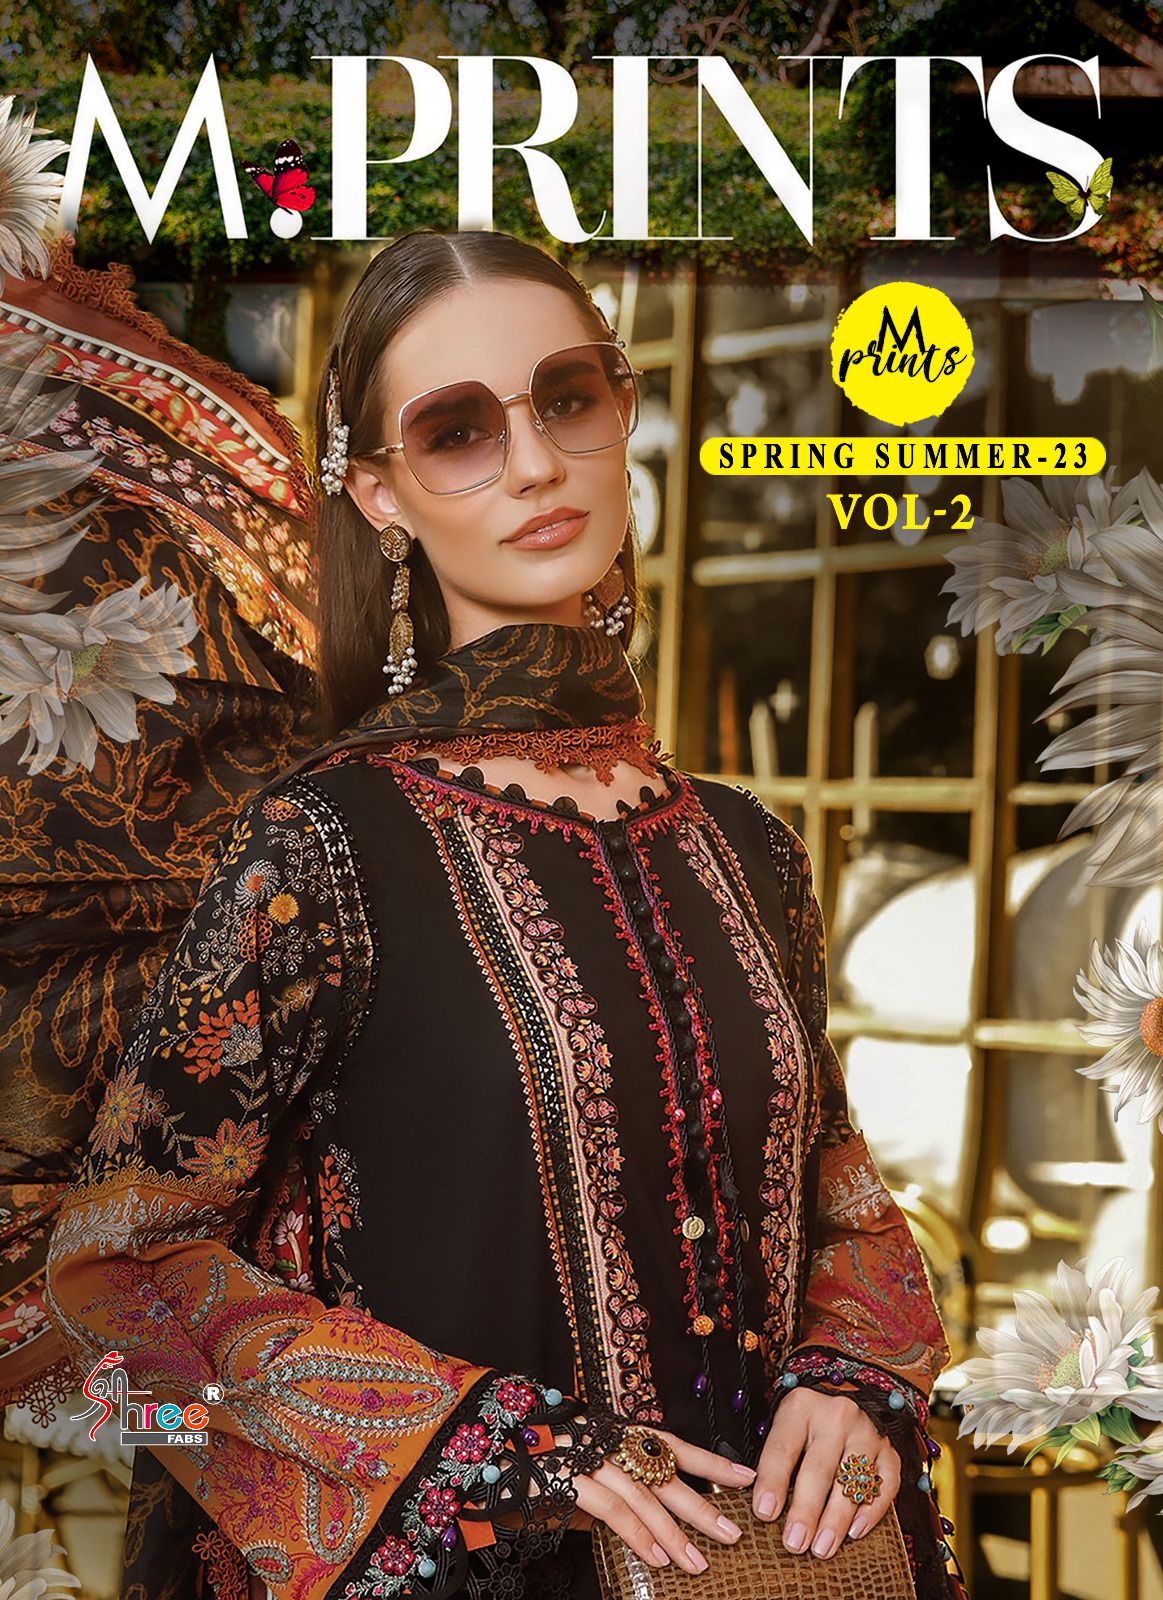 Shree Fabs M Prints Spring Summer - 23 Vol 2 Cotton With Embroidery Work Chiffon Dupatta Salwar Suits At Wholesale Rate